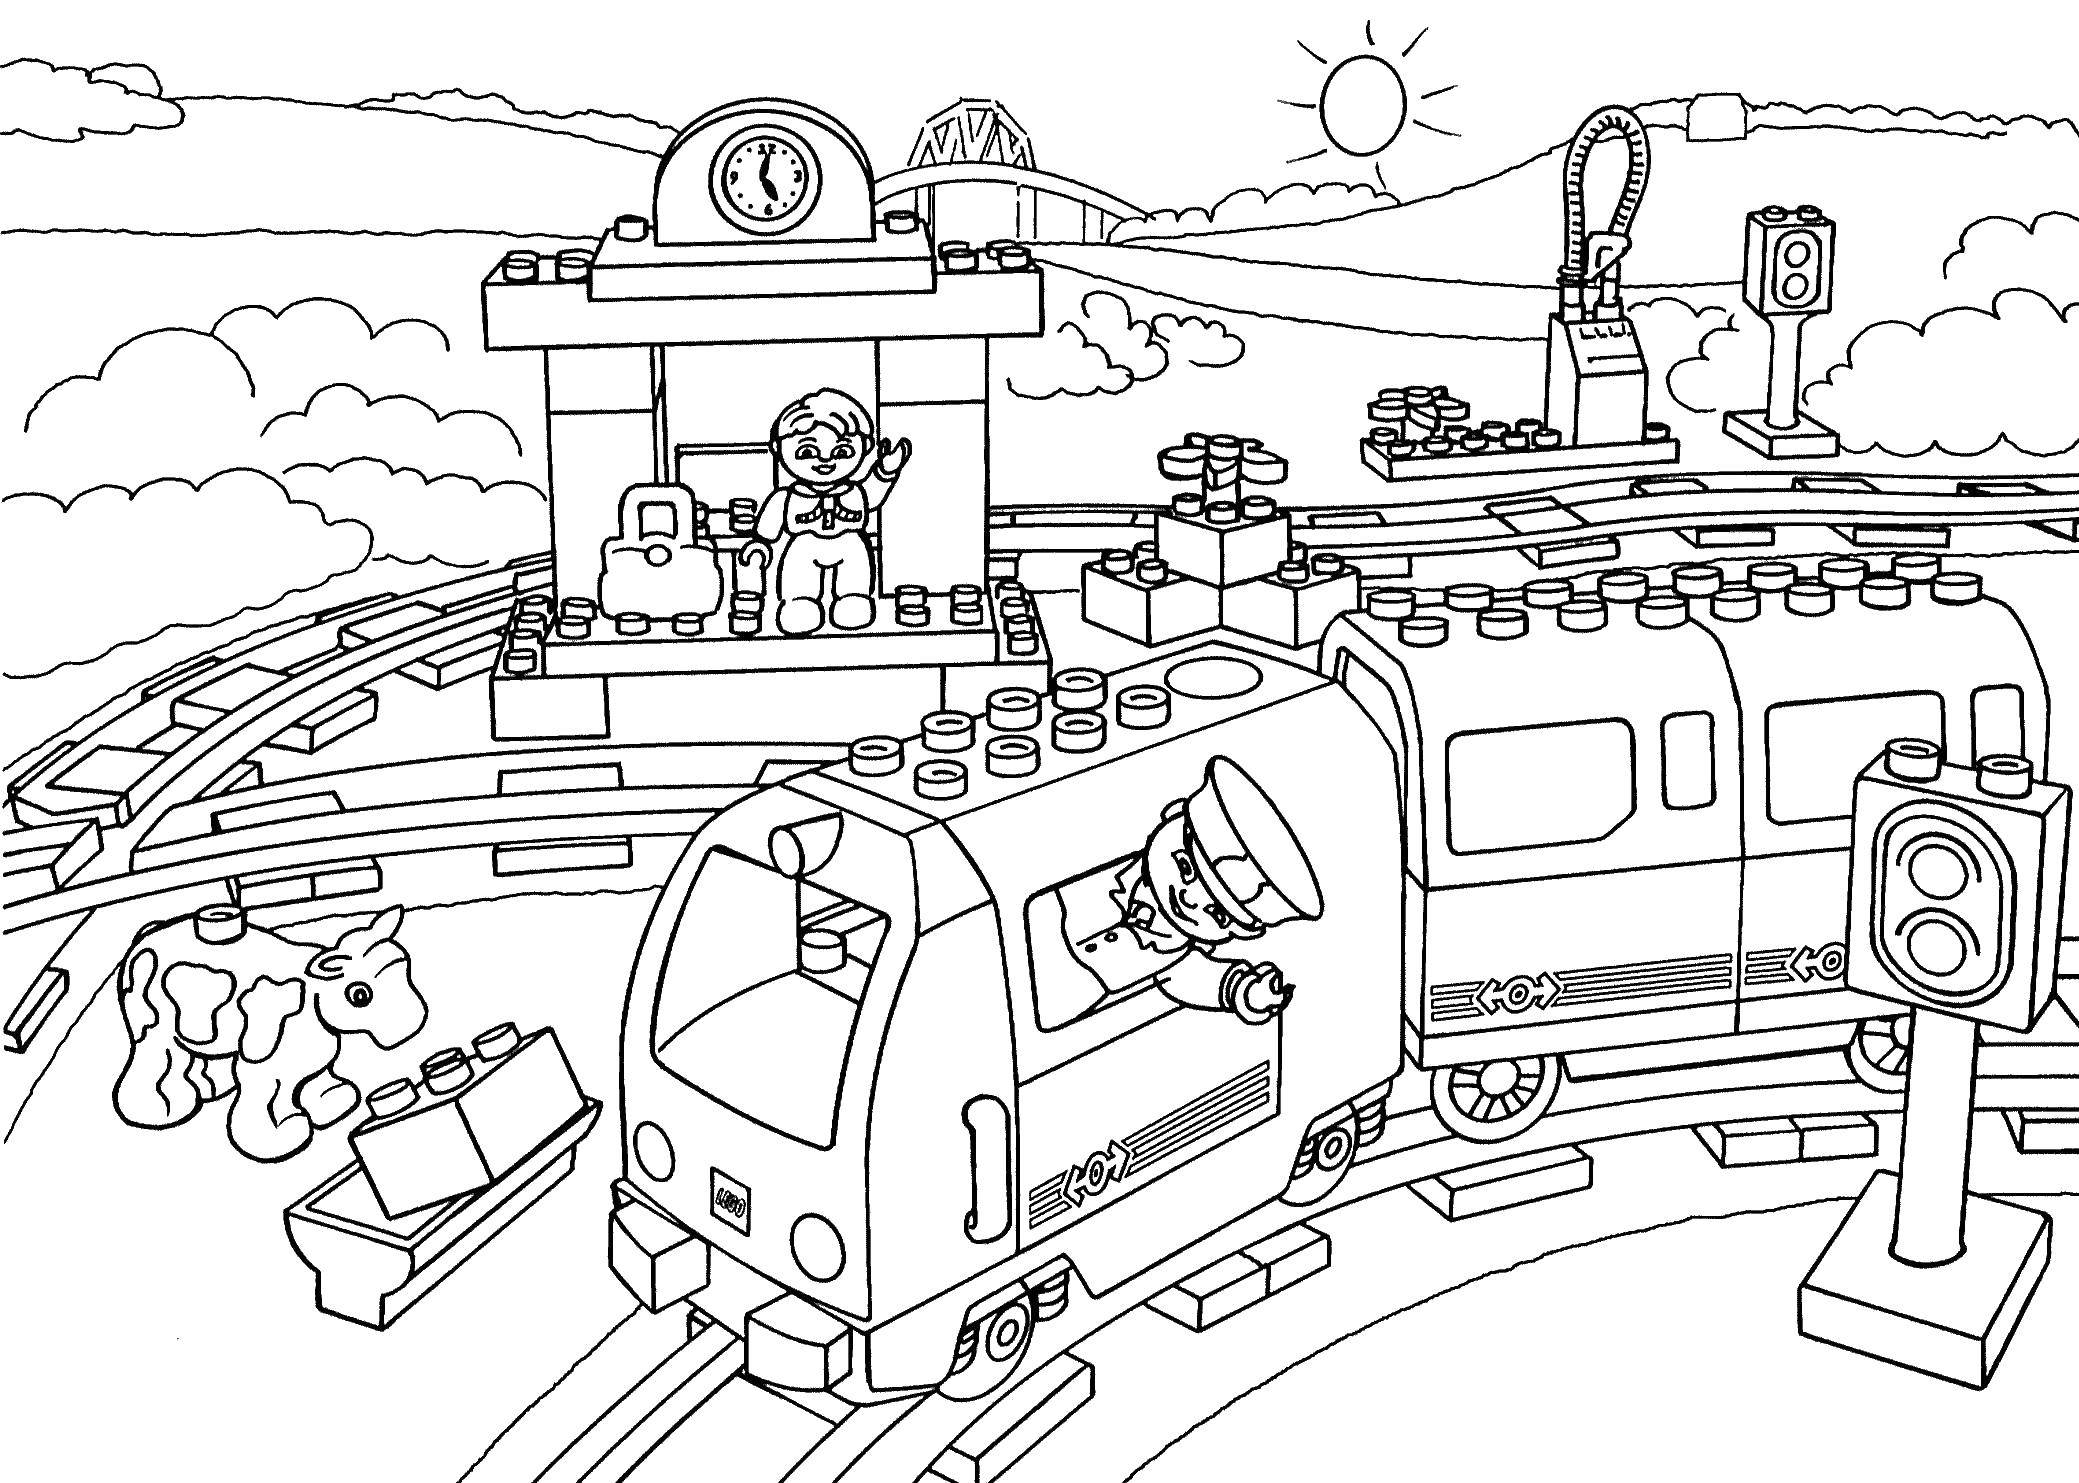 Railroad coloring page